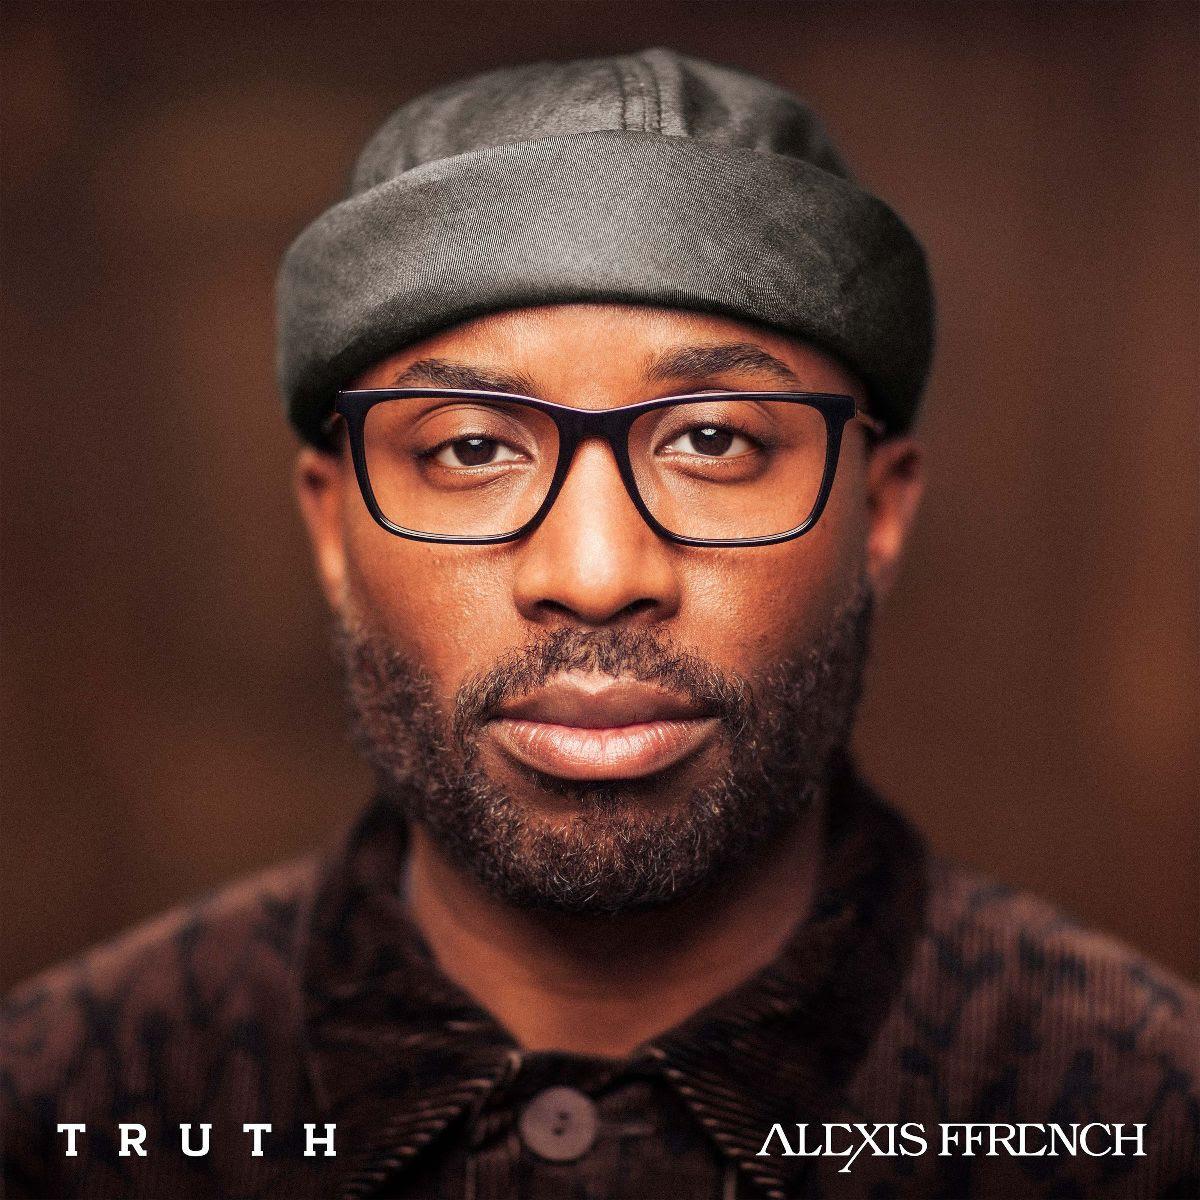 Acclaimed musician Alexis Ffrench announces new album 'Truth' & reveals first cut 'Guiding Light’